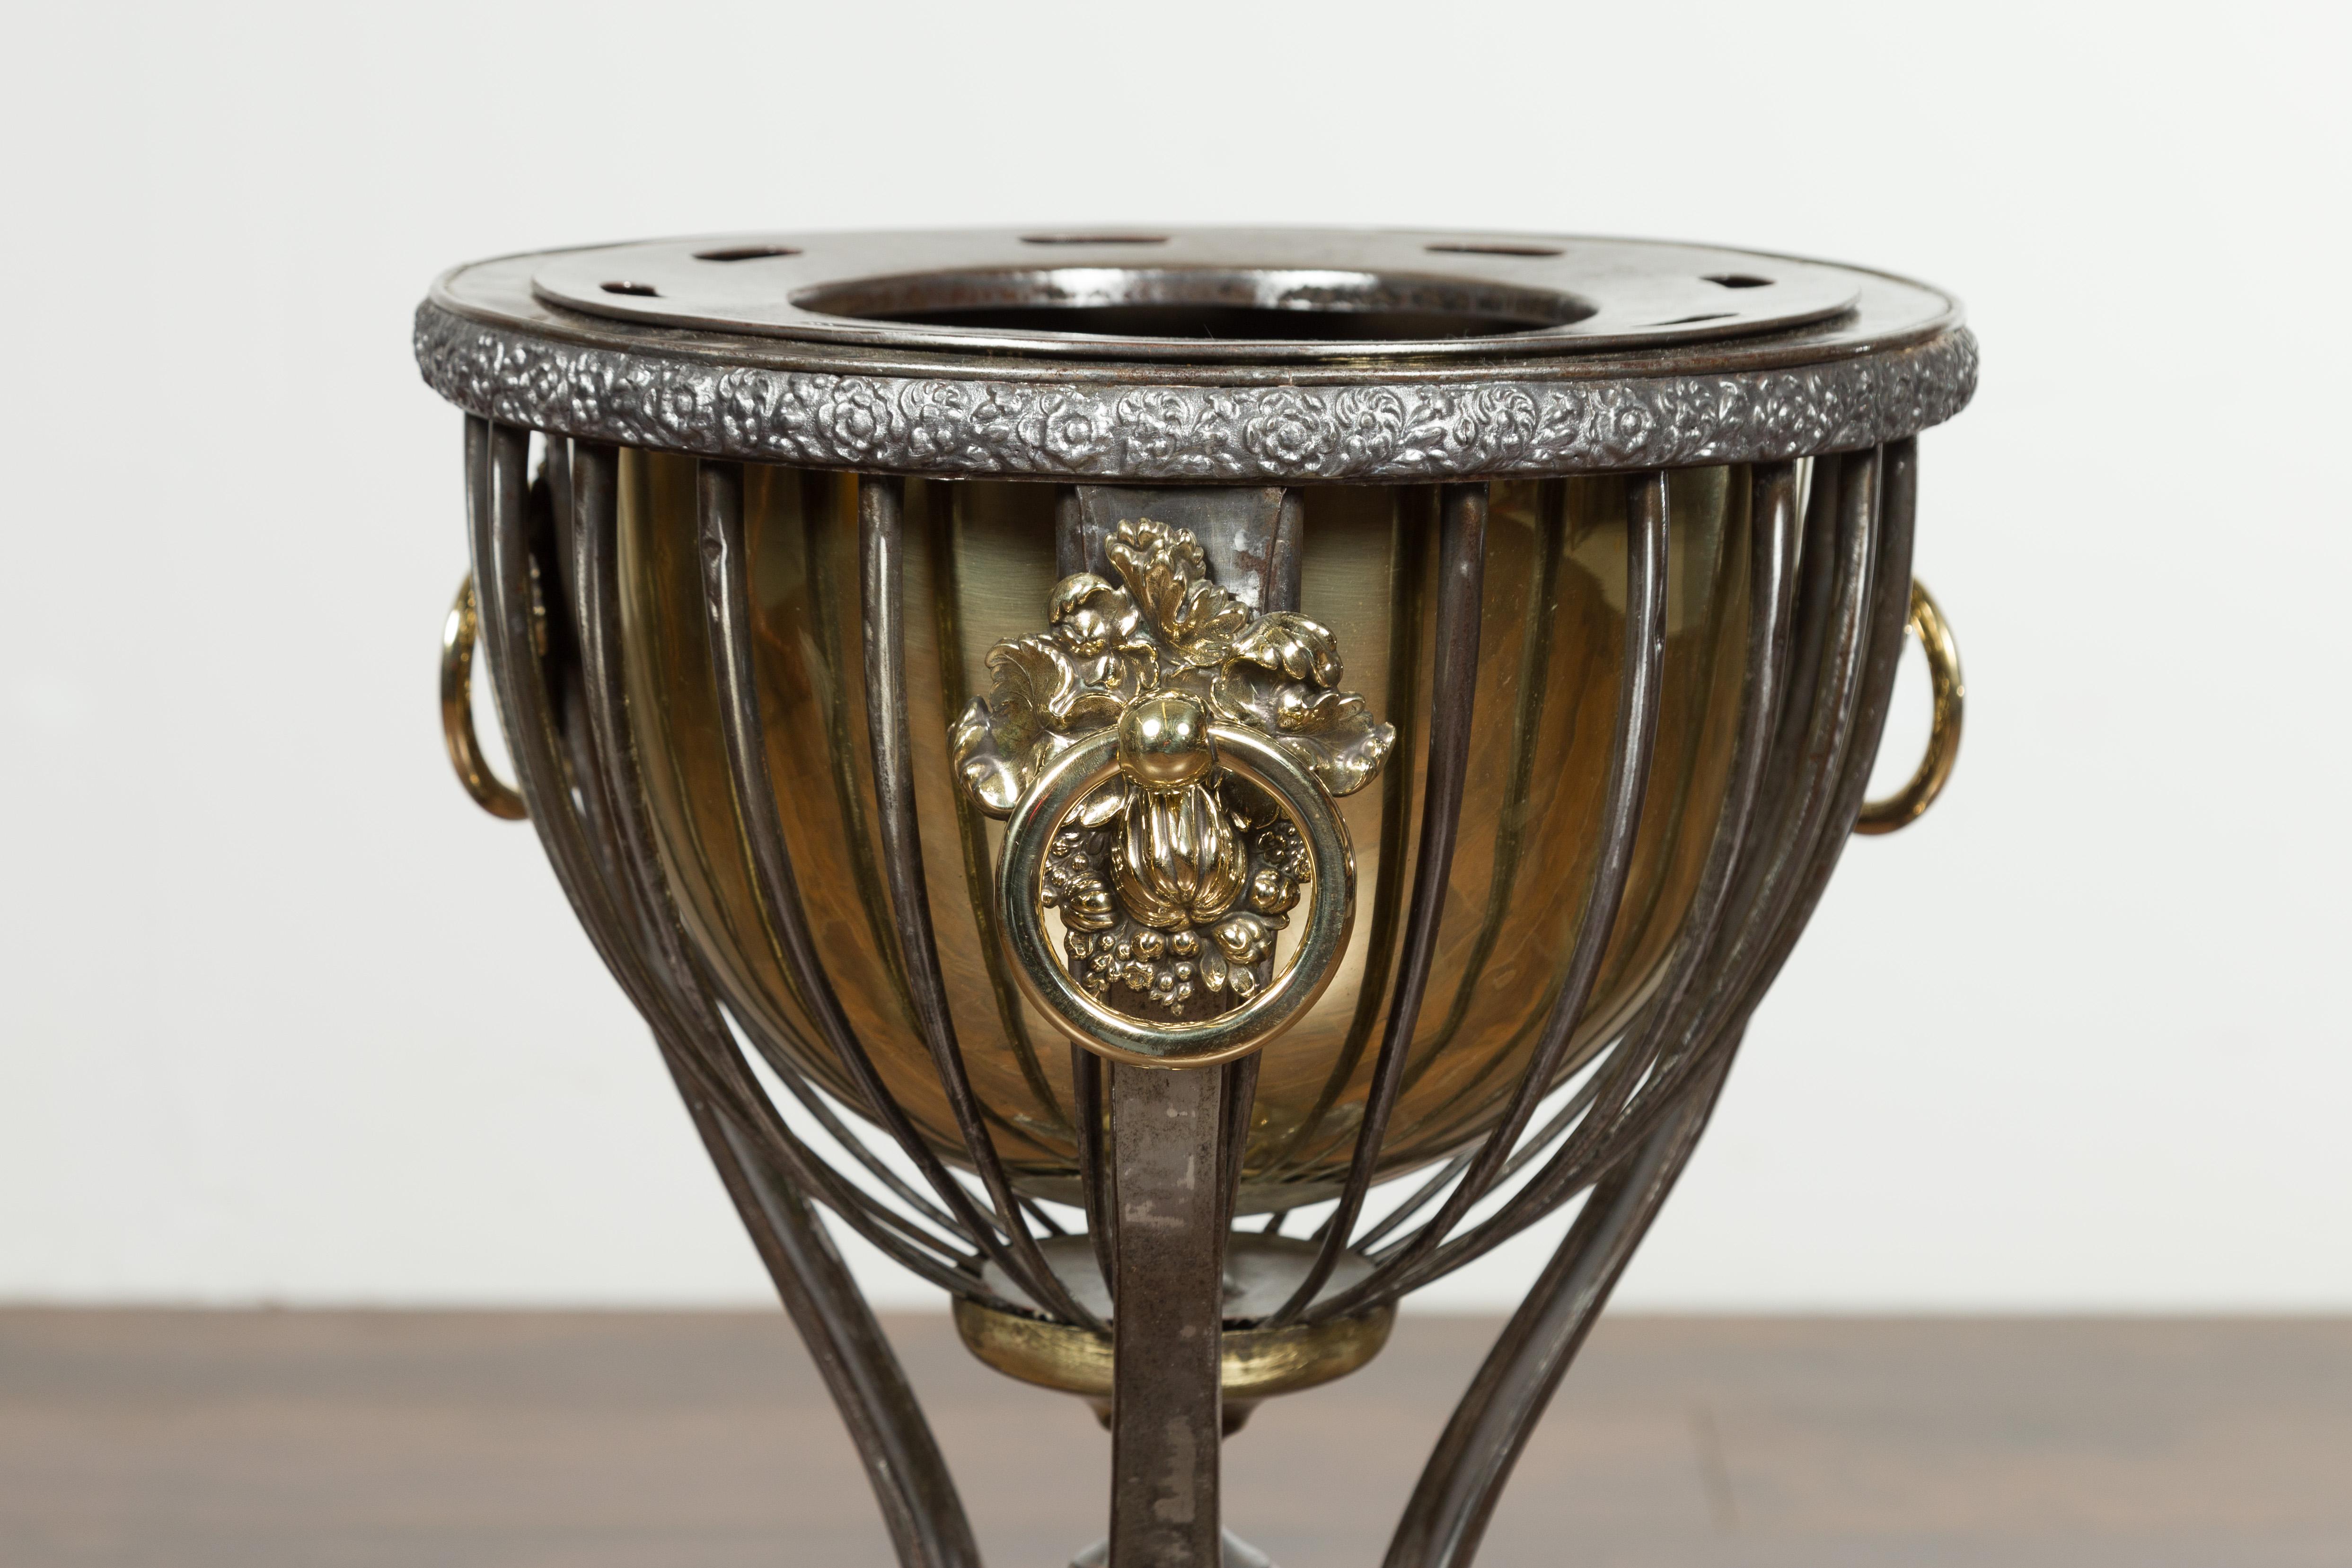 English 1820s Steel and Brass Tripod Wine Cooler with Foliage and Fruit Motifs For Sale 1